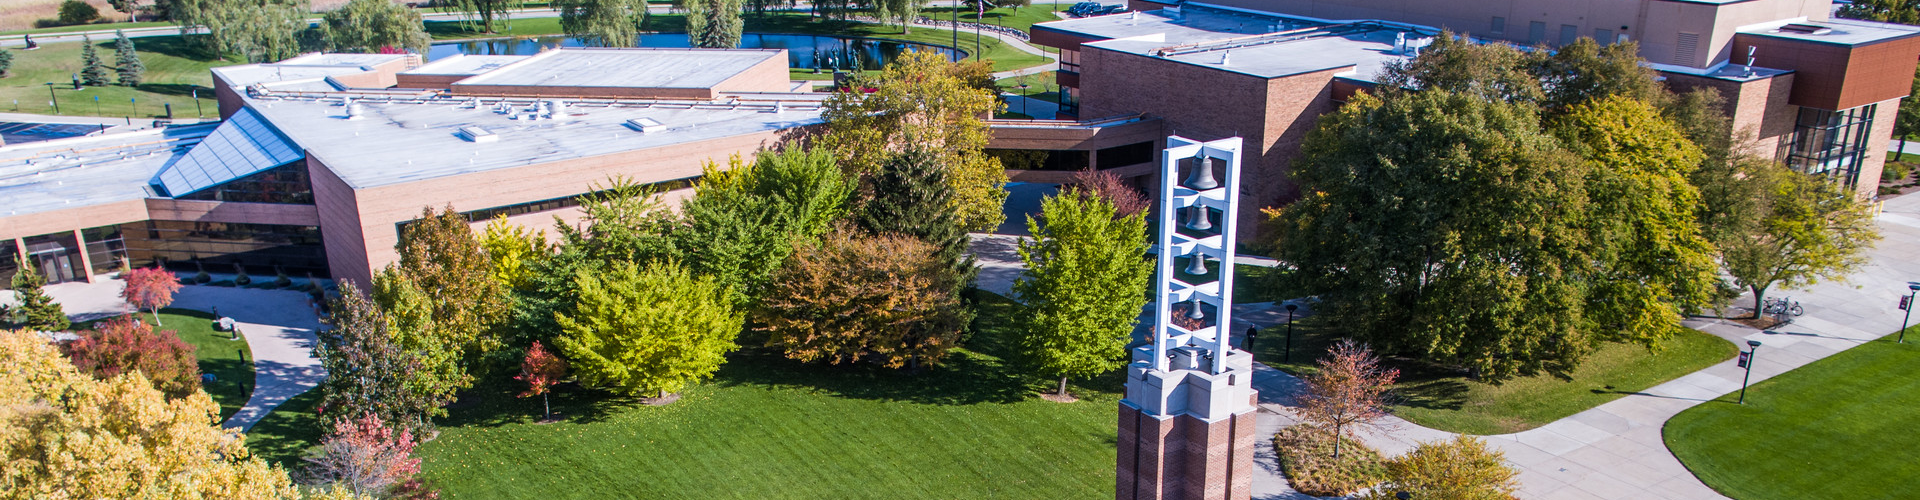 SVSU Campus Over the Bell Tower